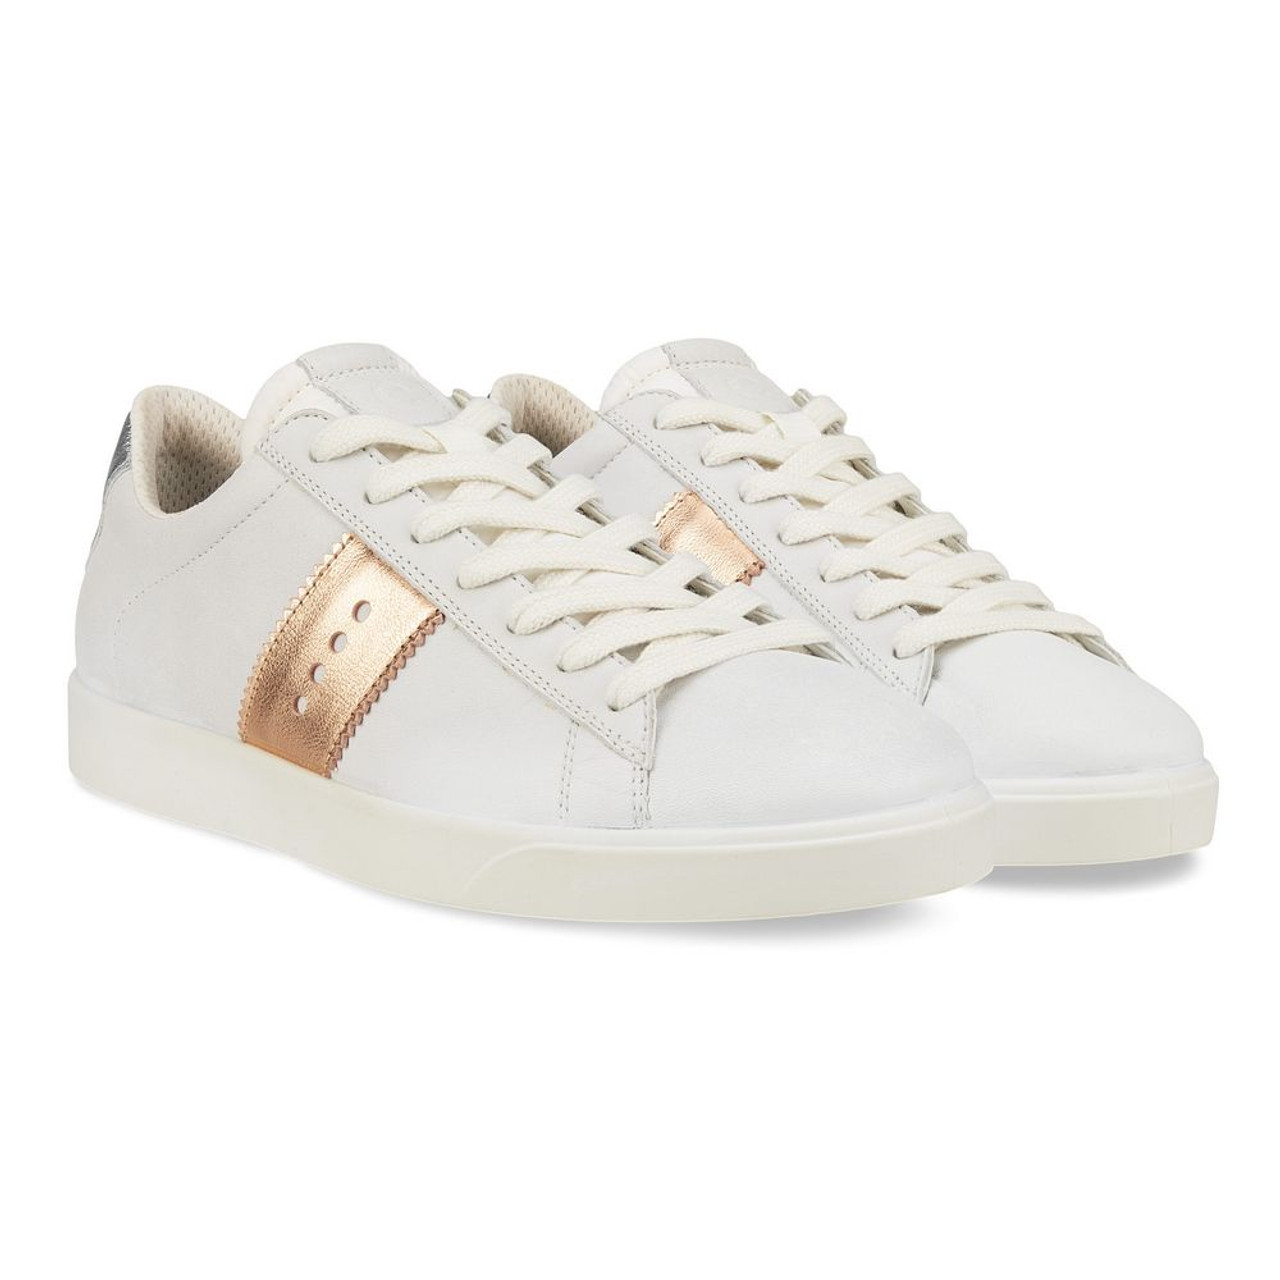 Discover 207+ bronze slip on sneakers super hot